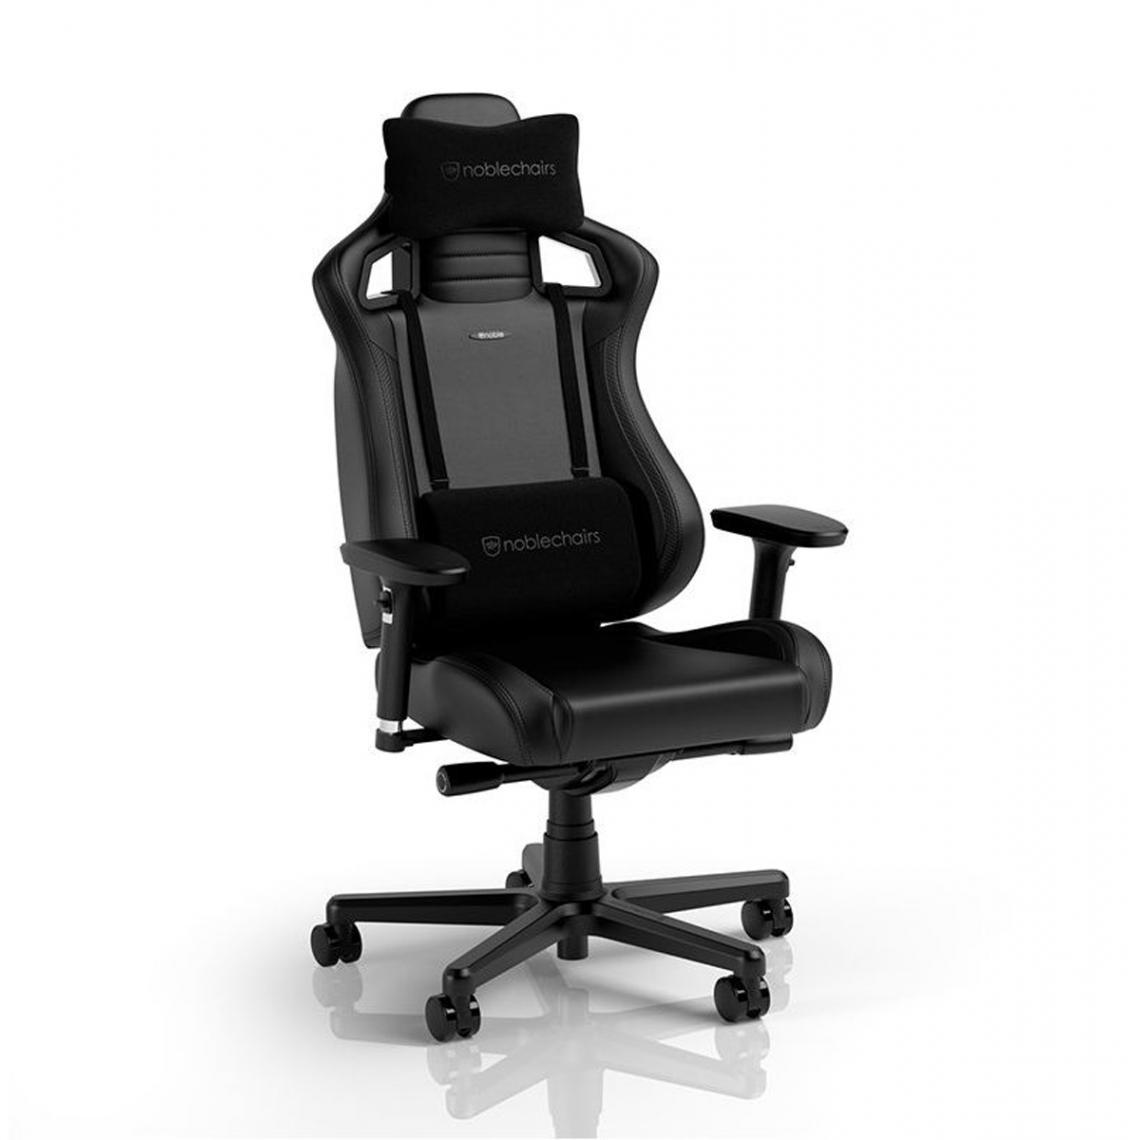 Noblechairs - Noblechairs EPIC Compact gaming - Noir - Chaise gamer